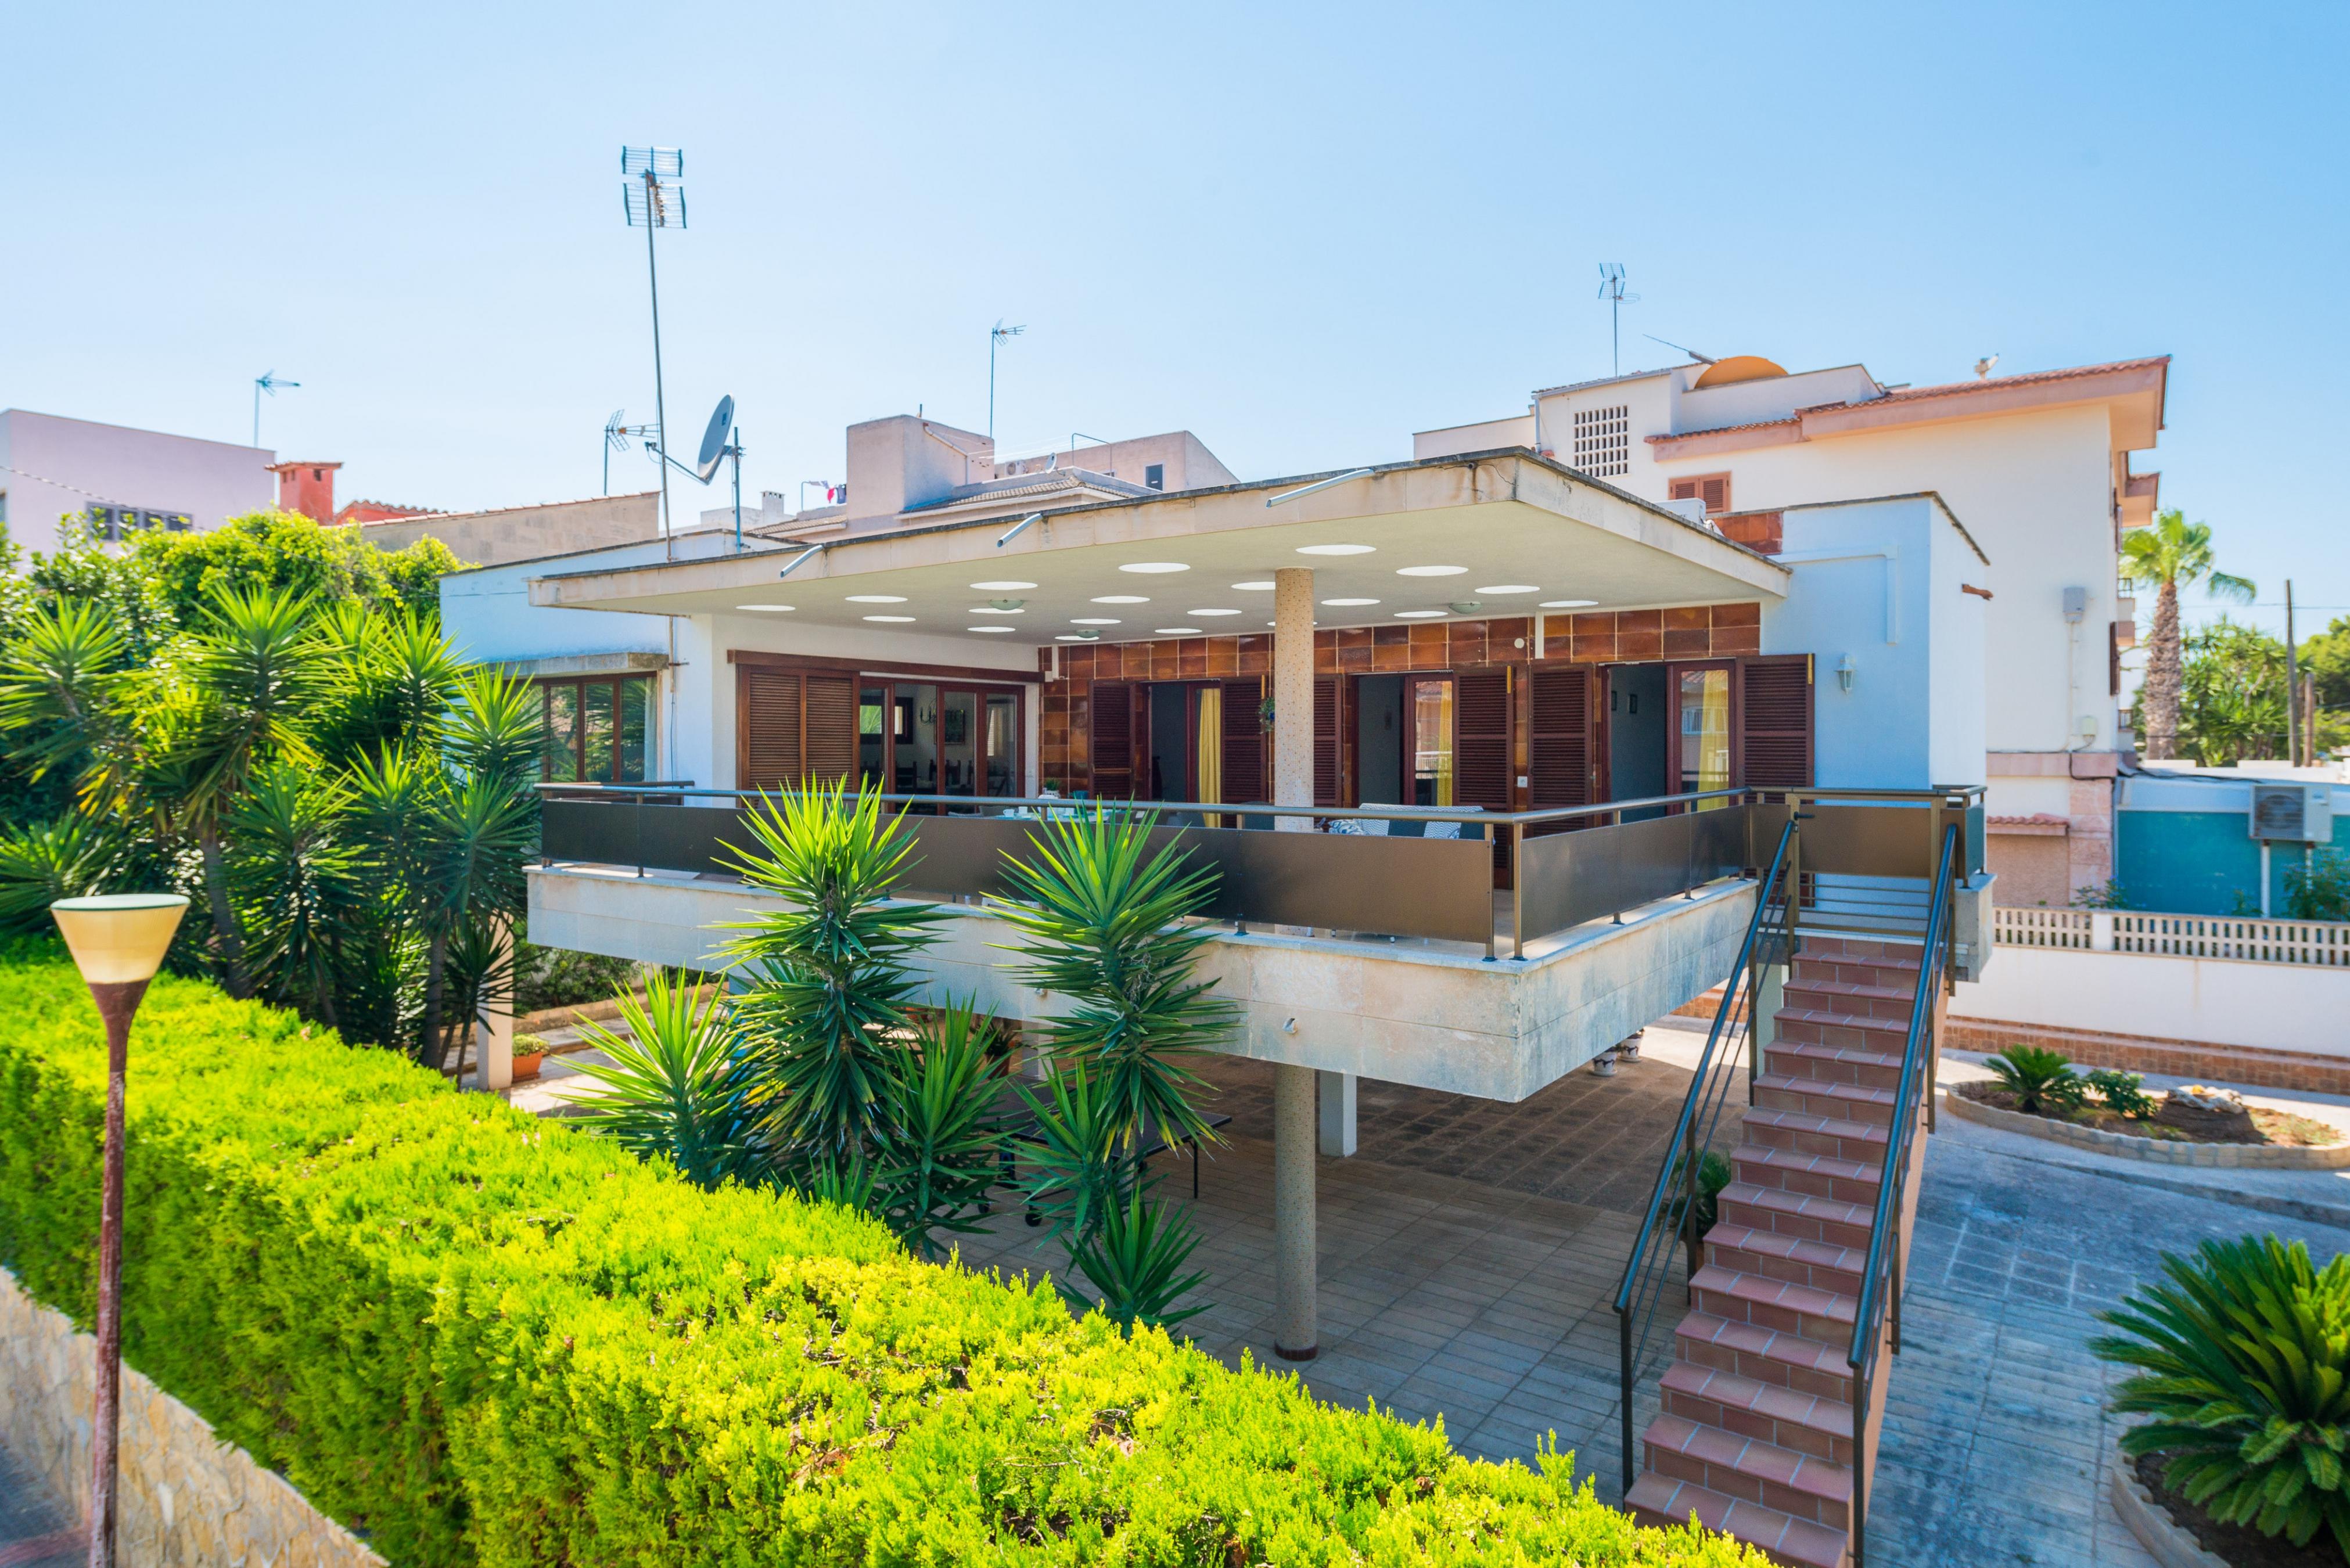 Property Image 1 - ELIANTO - Wonderful beach house near the sea with several furnished terraces perfect to enjoy the good wea